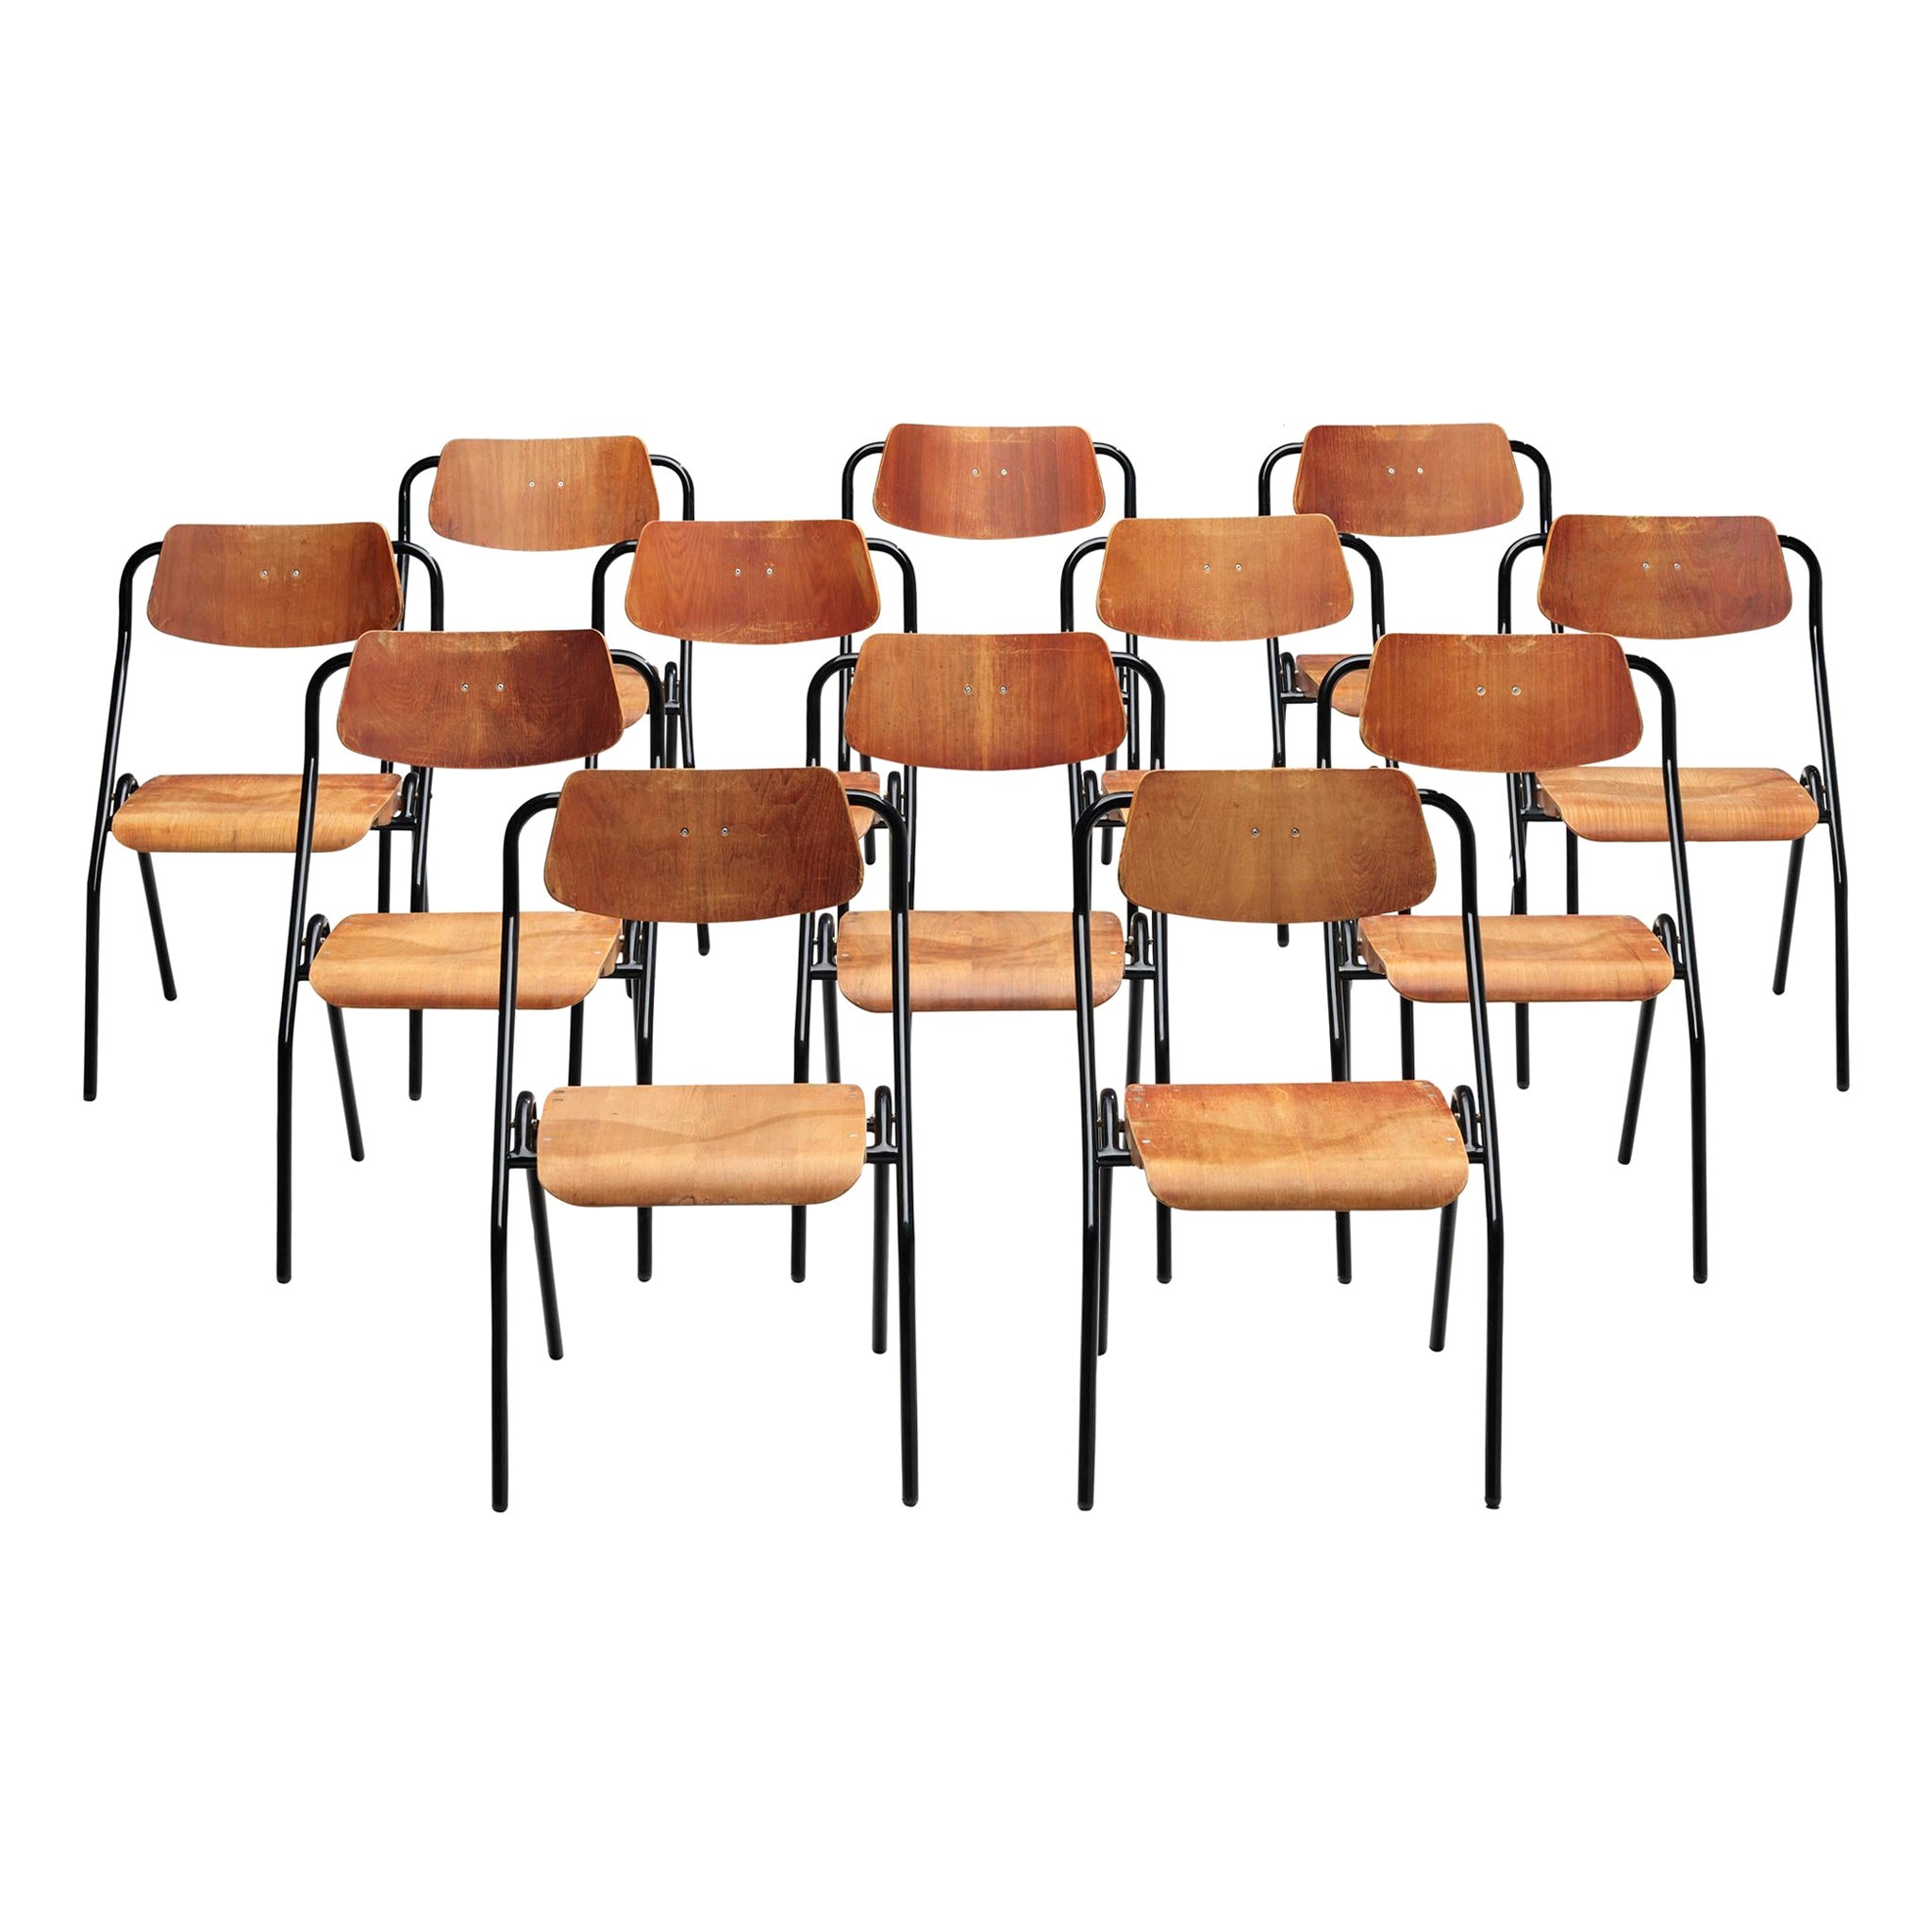 Large of Twelve Dutch Chairs with Black Tubular Frame  For Sale